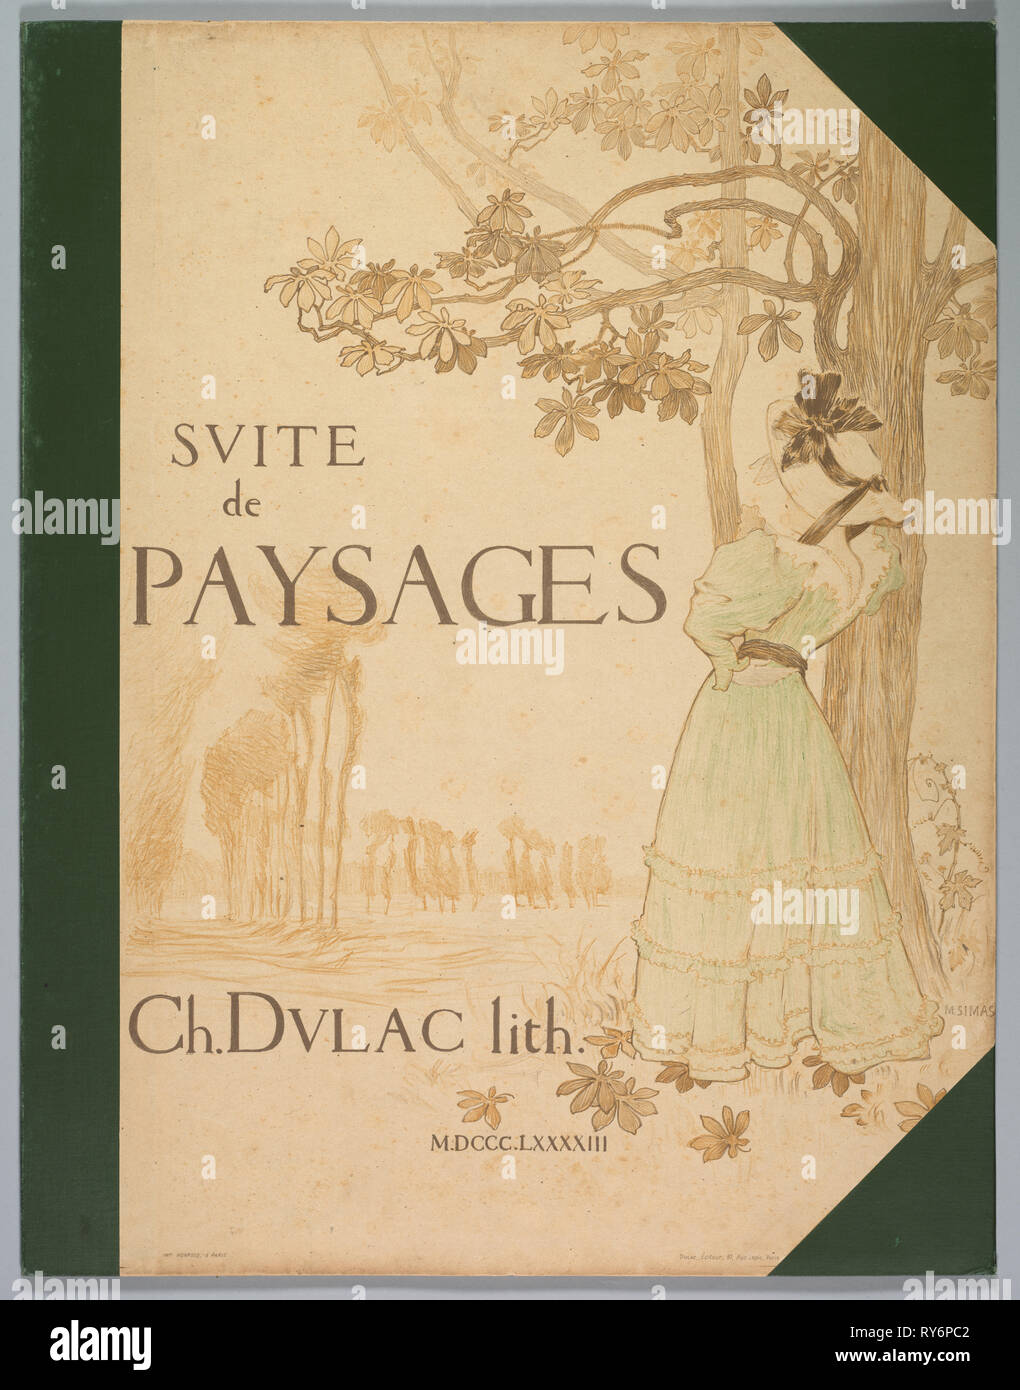 Suite de Paysages: Cover, 1892-1893. Charles Marie Dulac (French, 1865-1898), Eugène Martial Simas (French, 1862-1926), Printer: Monrocq. Color lithograph - Half-bound with green cloth and illustrated with a lithograph by Eugène Martial Simas (French, 1862-1926), printed in three colors; and interior with marbled endpapers Stock Photo